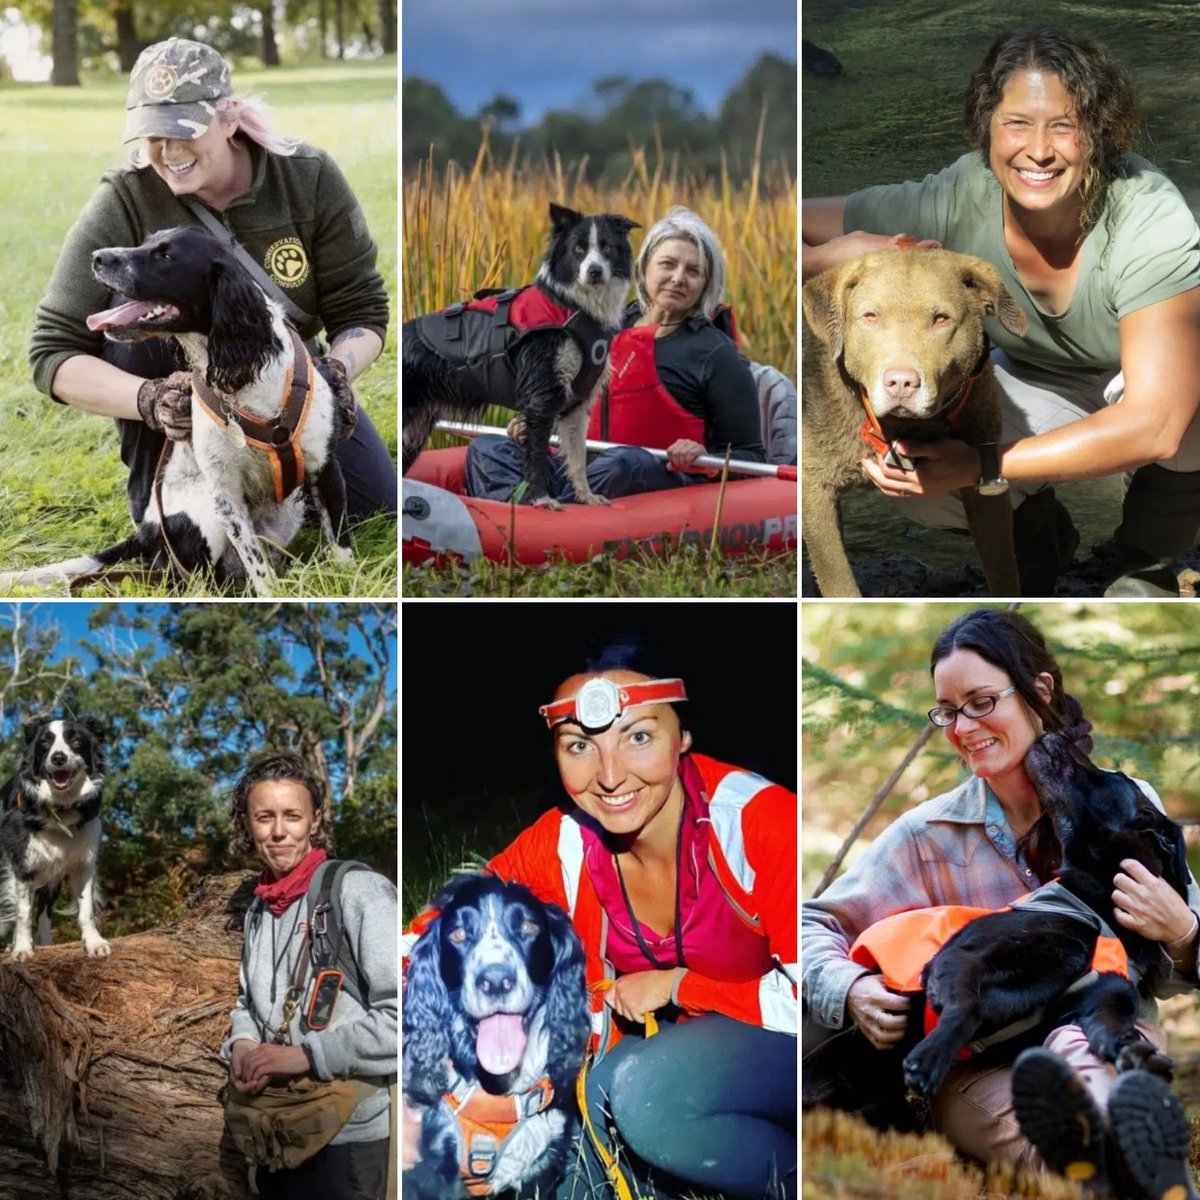 Today is #InternationalWomensDay! ✊🏾 to these #FemaleK9Handlers, vanguards for #WildlifeConservation utilizing #ConservationDogs around the world: @Vk9consultant, @SkylosEcology, Dr. DeMatteo, N. Glover, & our very own, J. Hartman. 🌏🐕‍🦺 #WomenInConservation #WomensDay2023